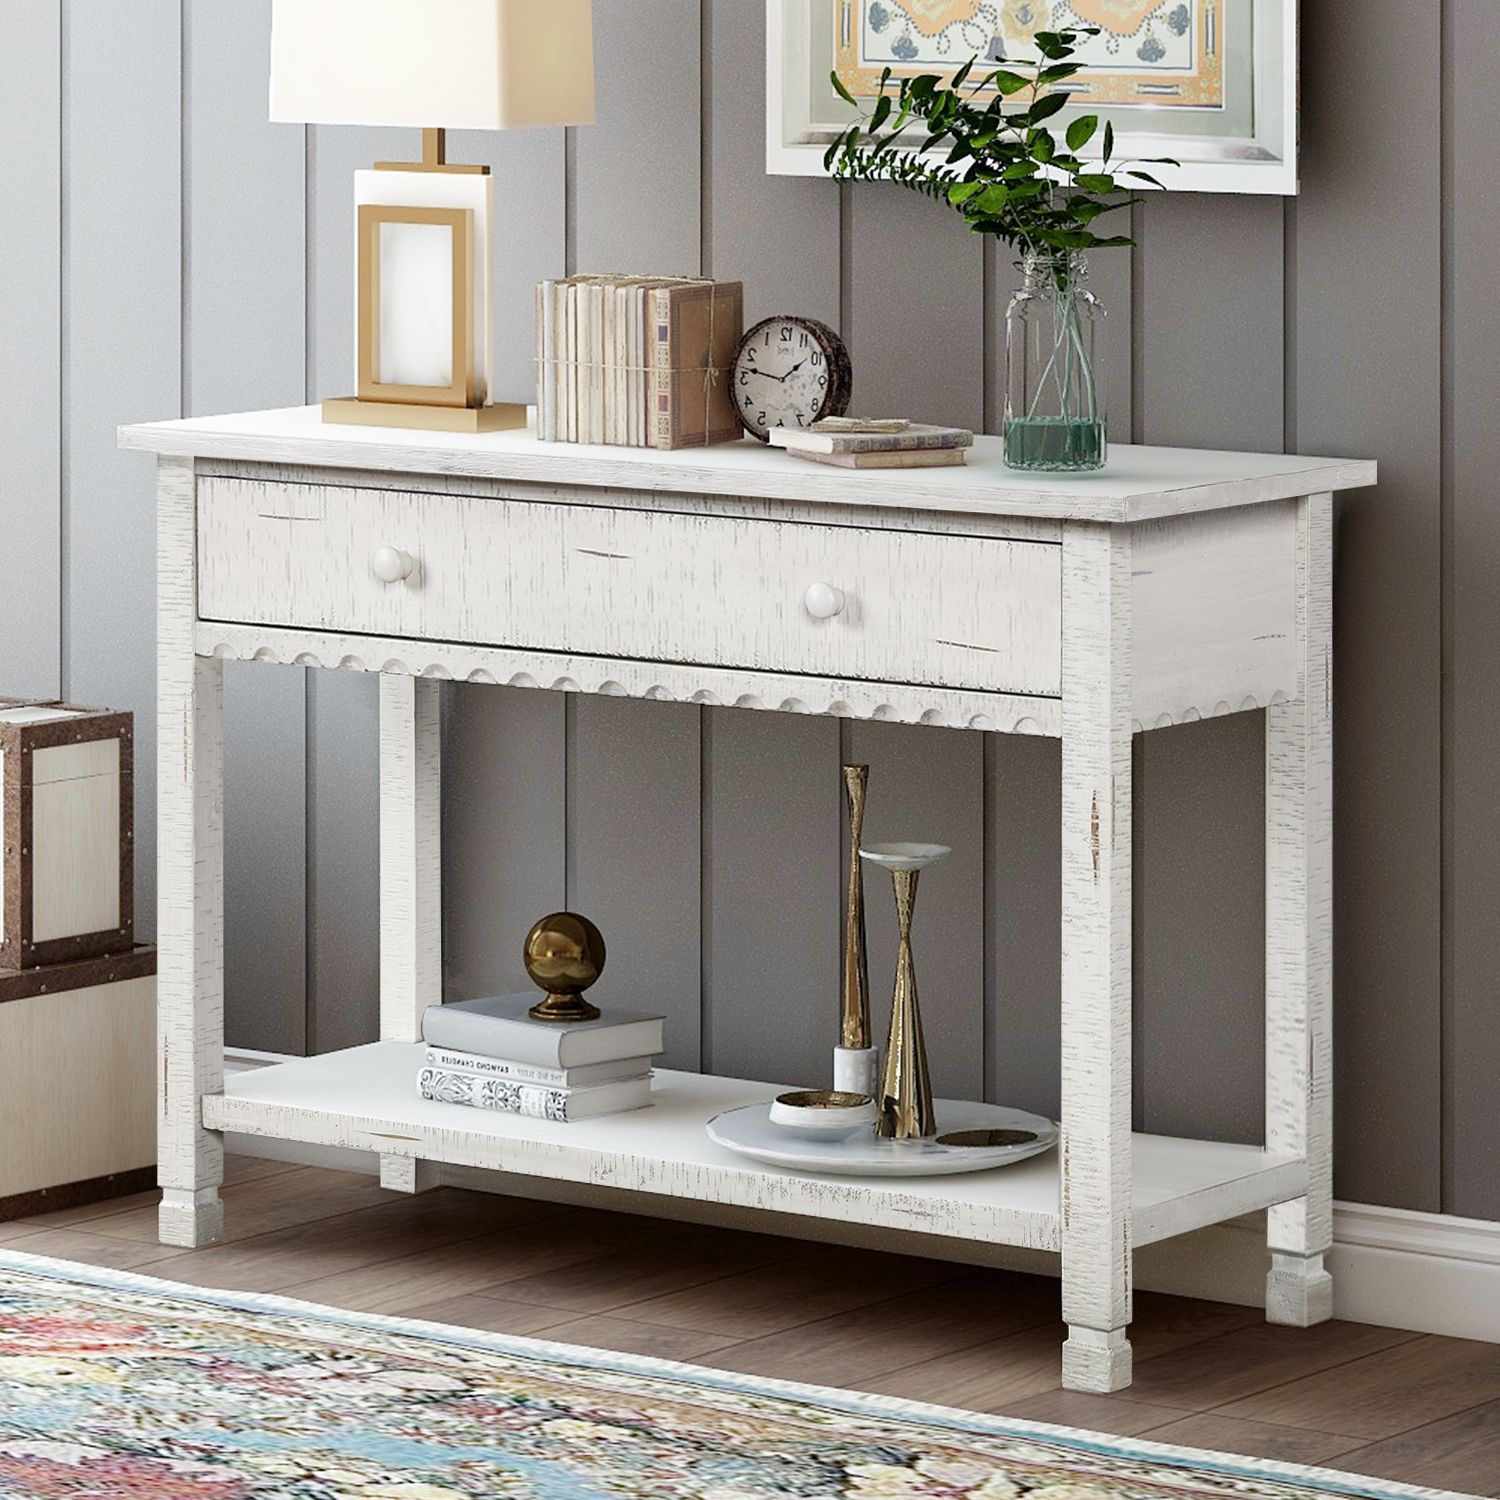 Recent Console Sofa Table With Drawers, Btmway Wooden Rustic Inside White Triangular Console Tables (View 2 of 10)